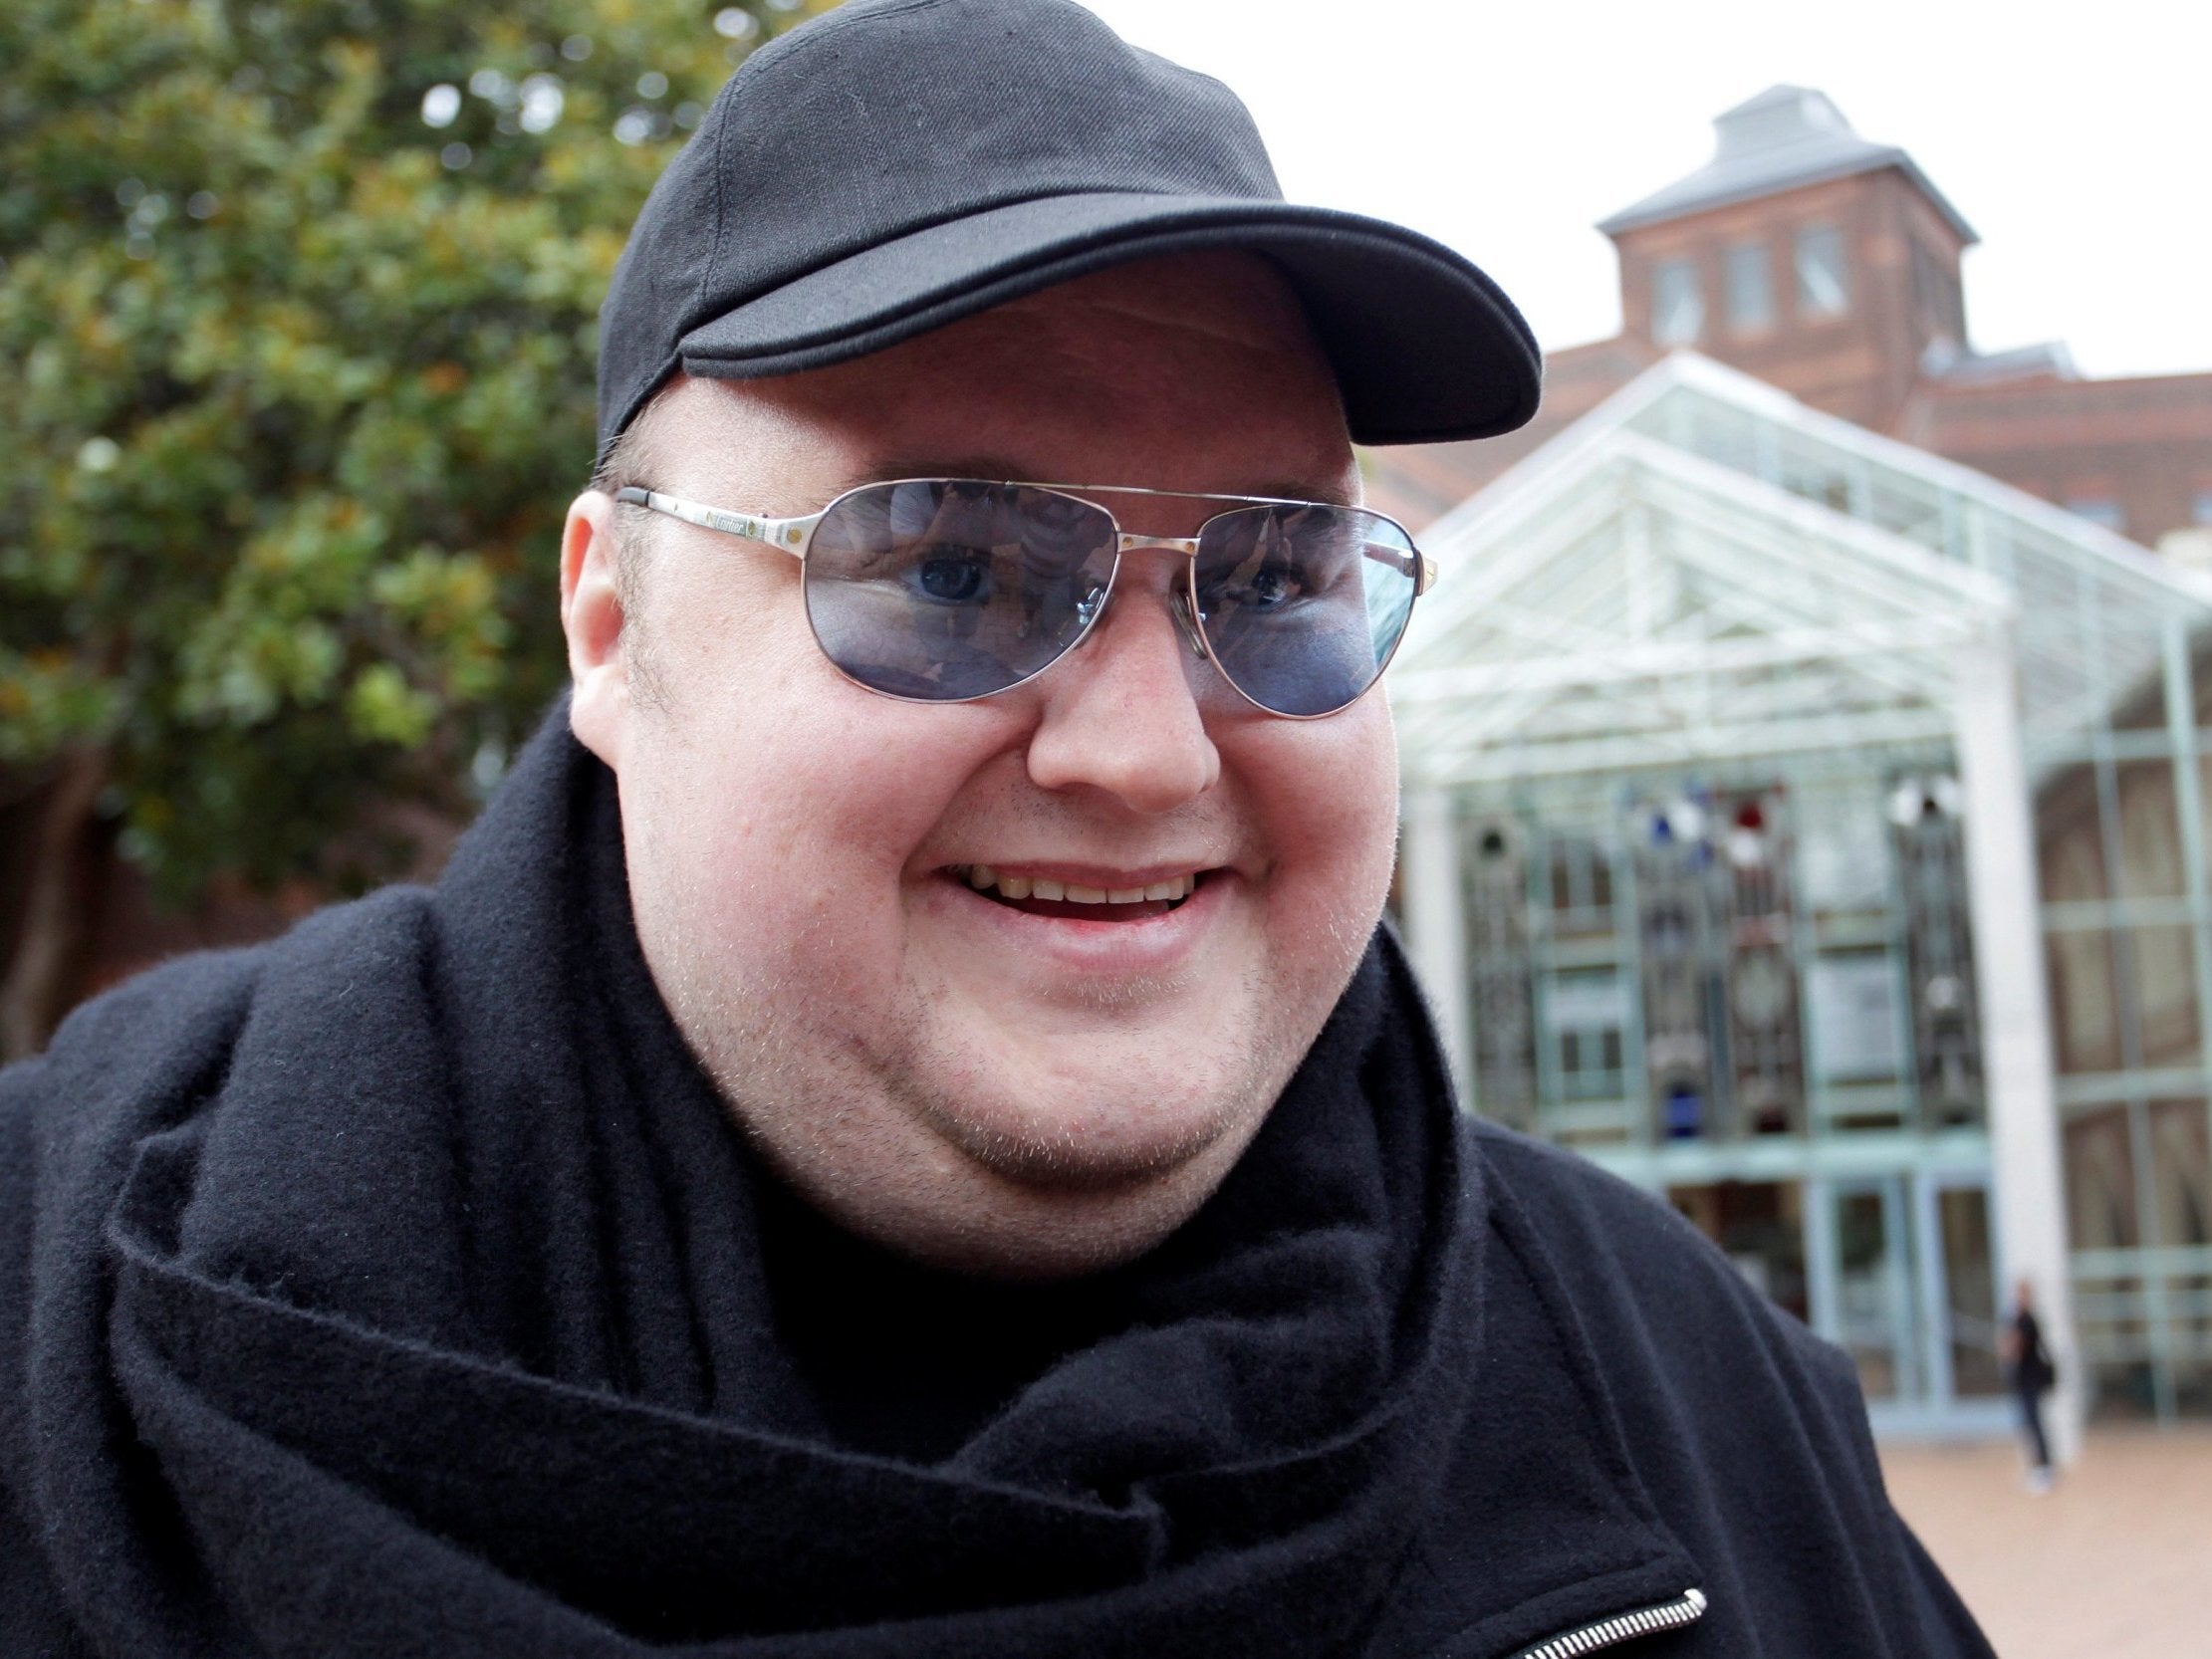 Mr Dotcom gained notoriety in Germany as a teen hacker who received a two-year suspended sentence for selling identities he had siphoned from telephone operators' client database